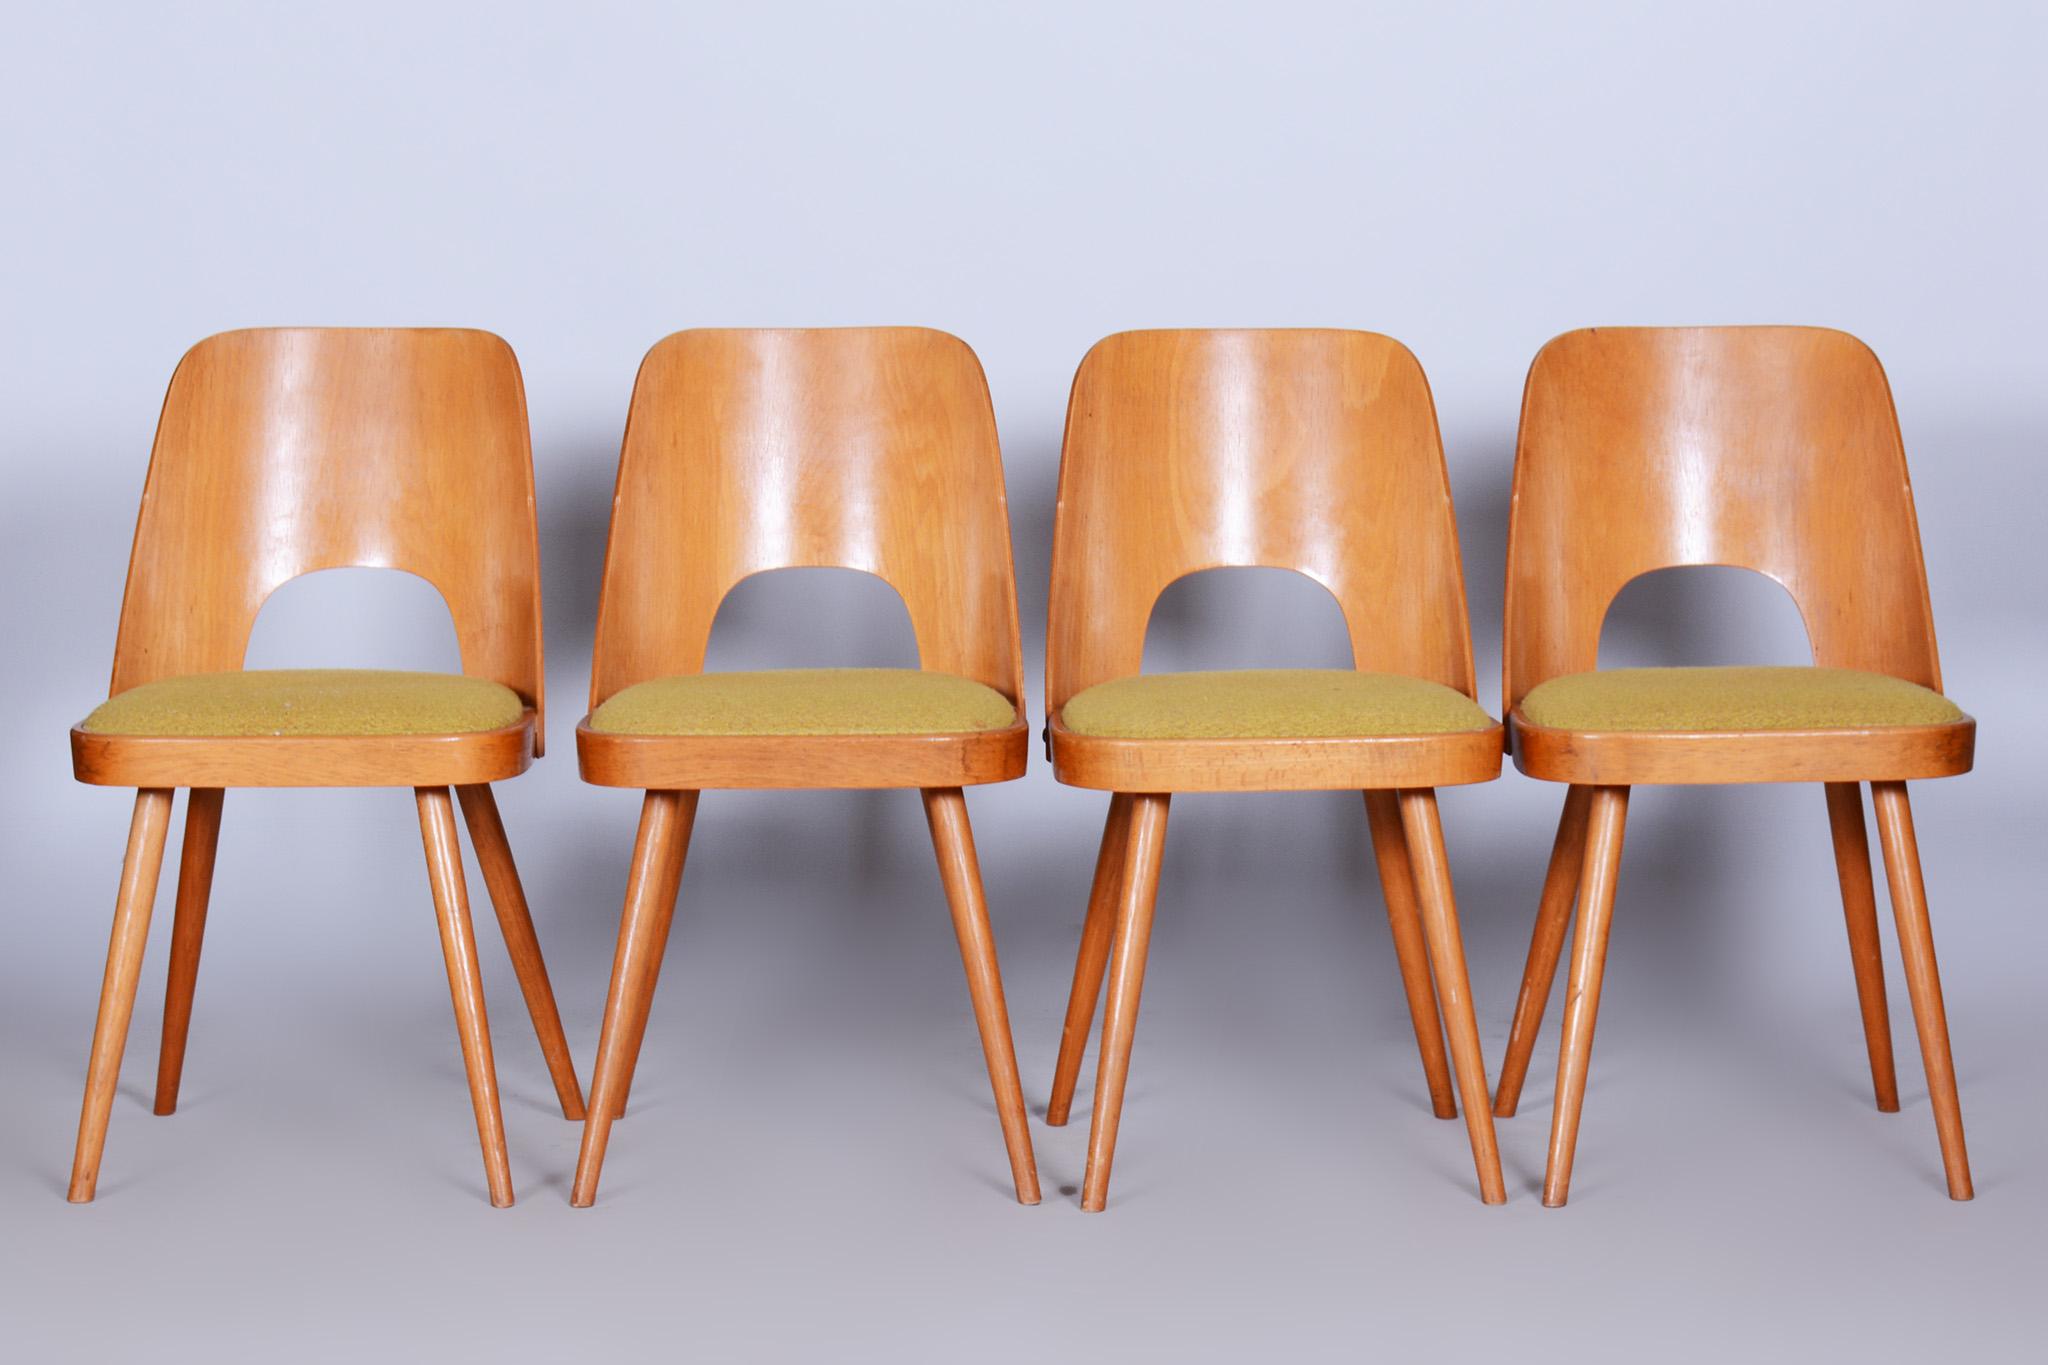 Set of four czech midcentury chairs made by Architect Oswald Haerdtl.

Material: beech, fabric.
Period: 1950-1959.
Source: Czechia.

Well preserved original condition.